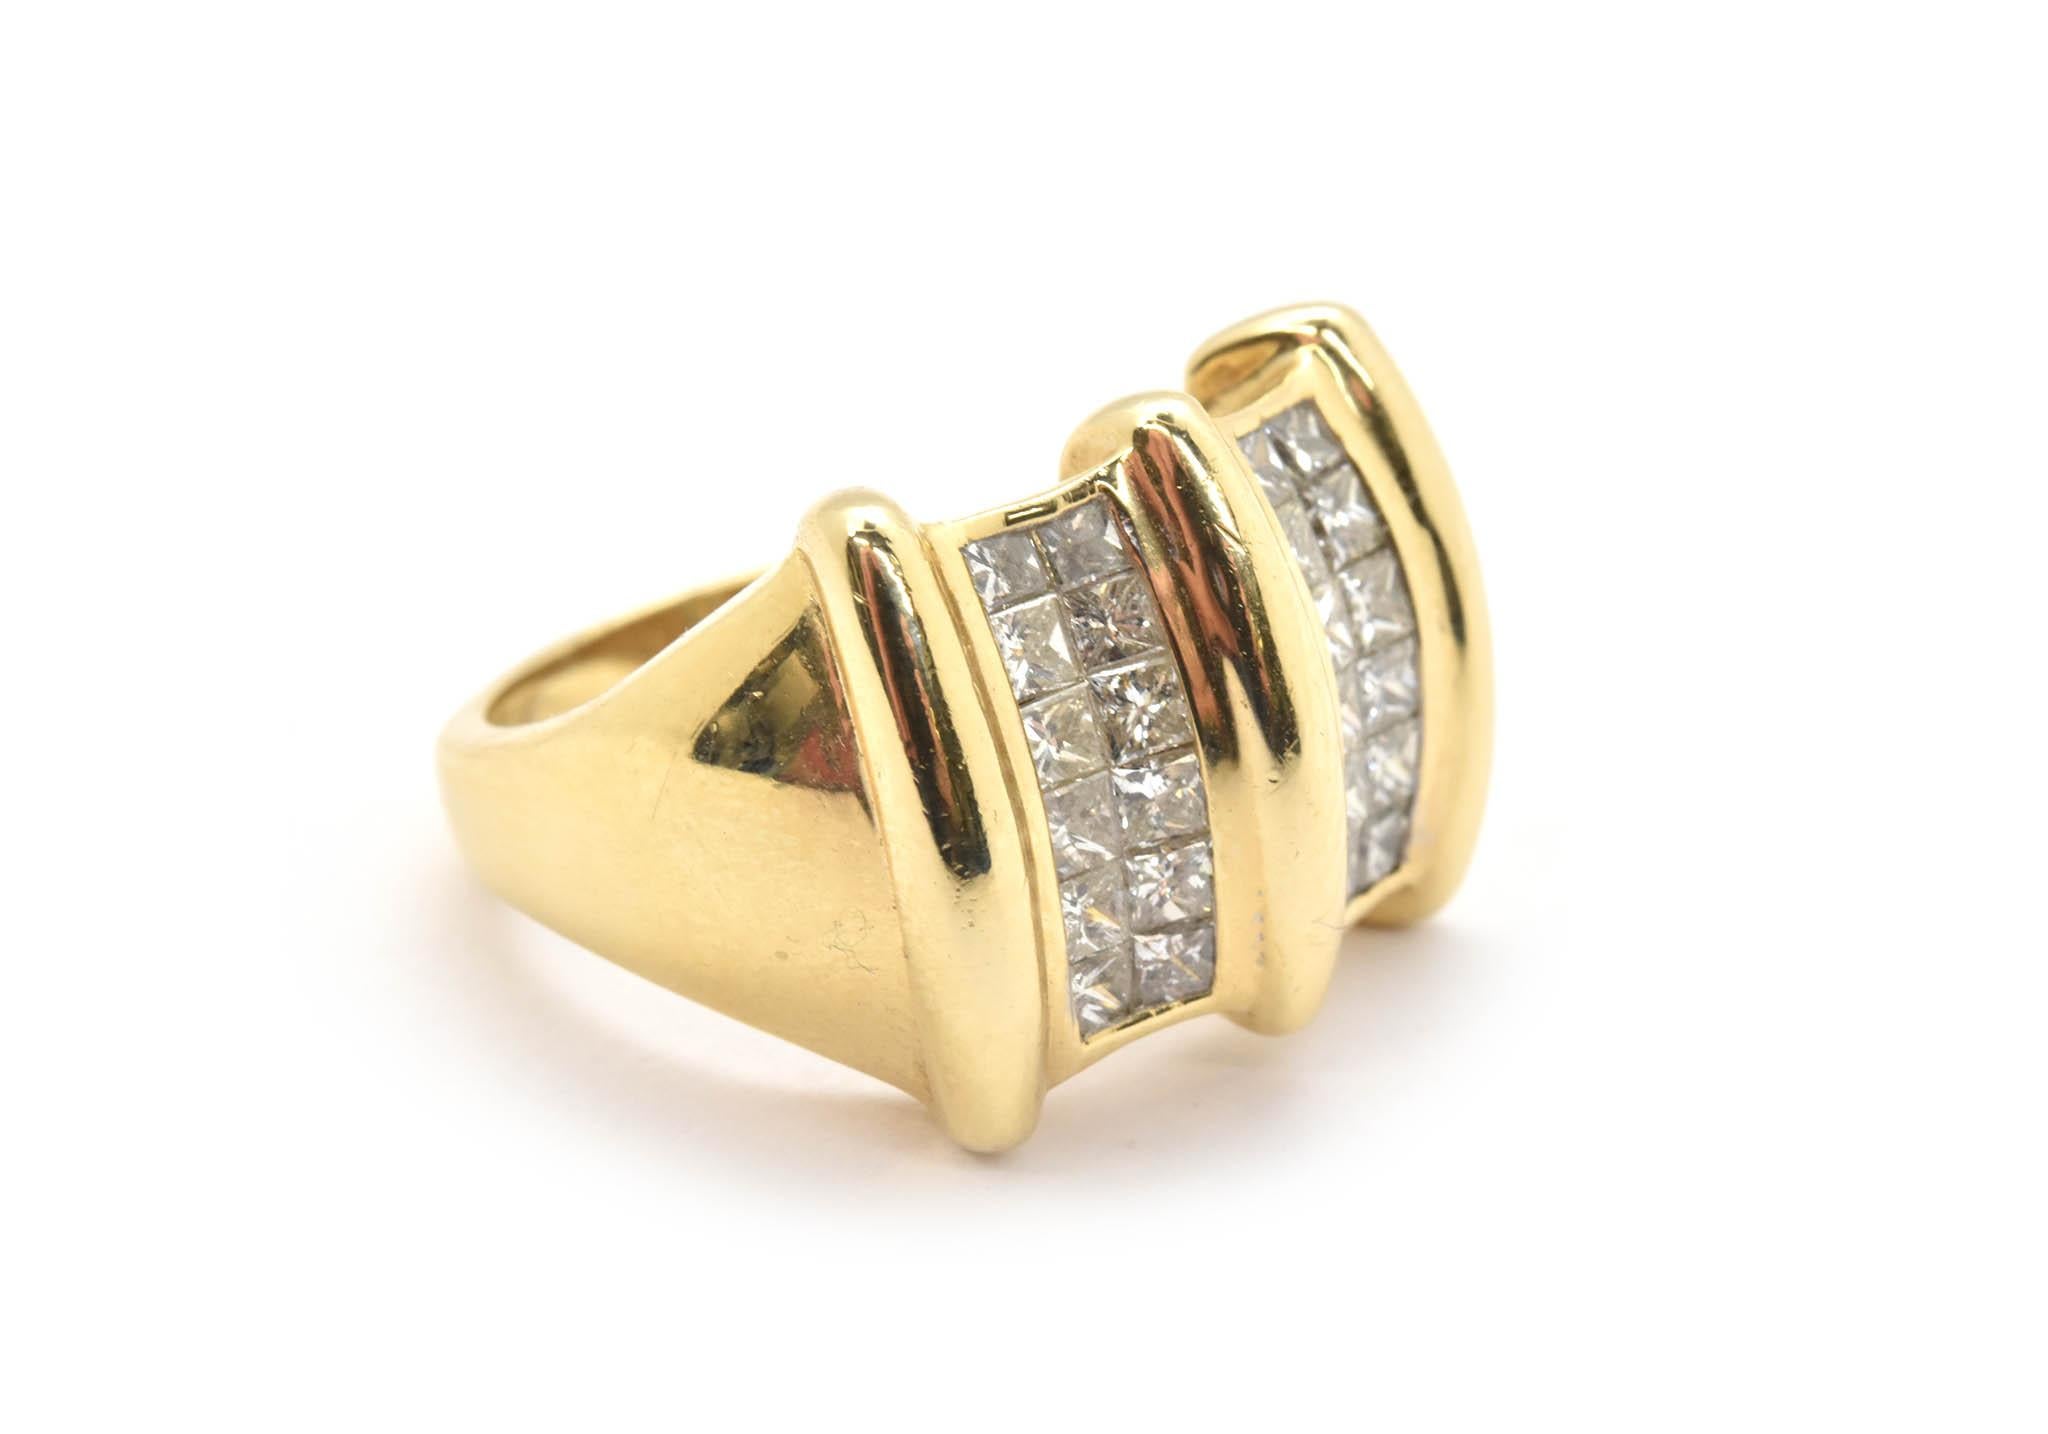 This band is made in 14k yellow gold, and it features invisible-set princess-cut diamonds. The diamonds have a total weight of about 1.50 carats. The stones are graded H-I in color and SI in clarity. The ring measures 15mm wide, and it weighs 10.64